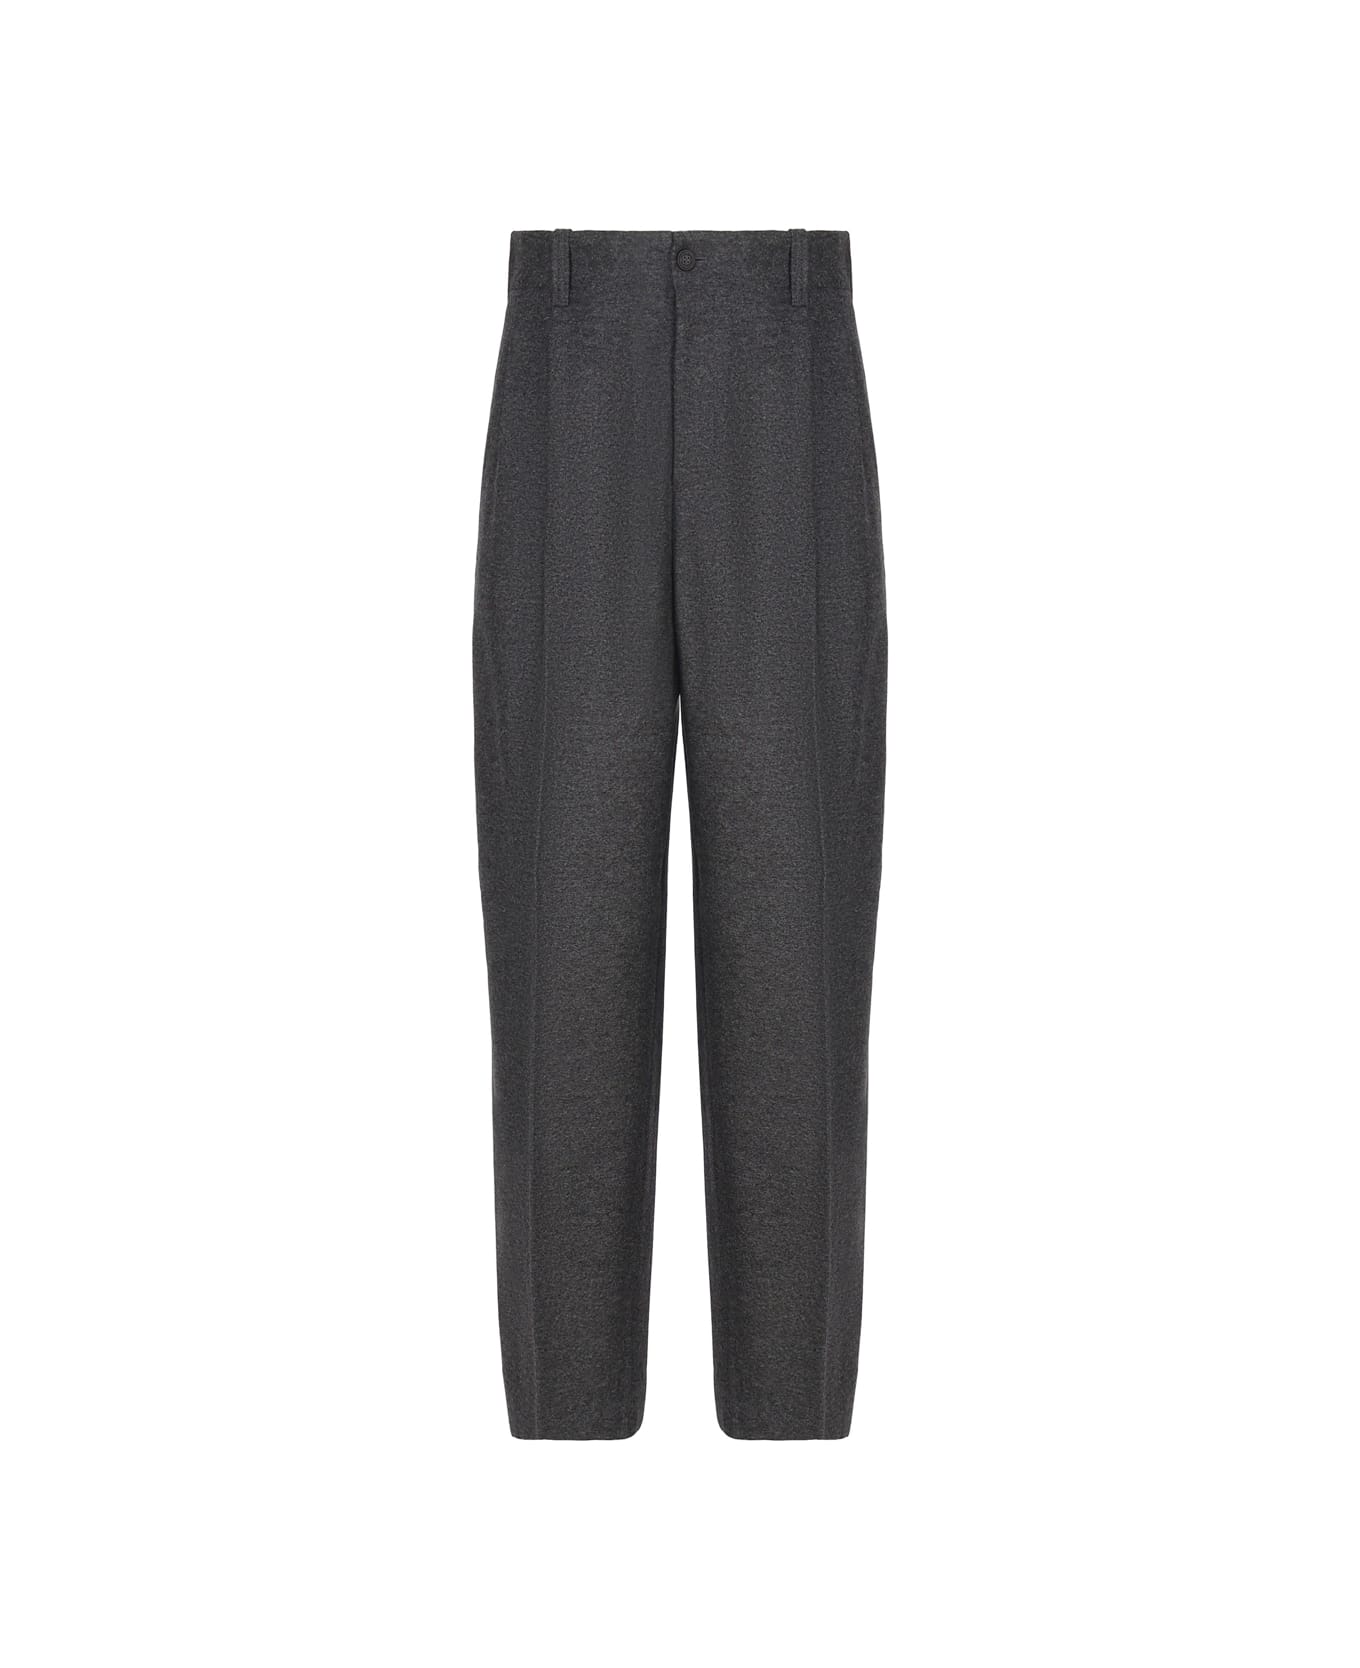 Golden Goose Pleated Pants - Grey ボトムス